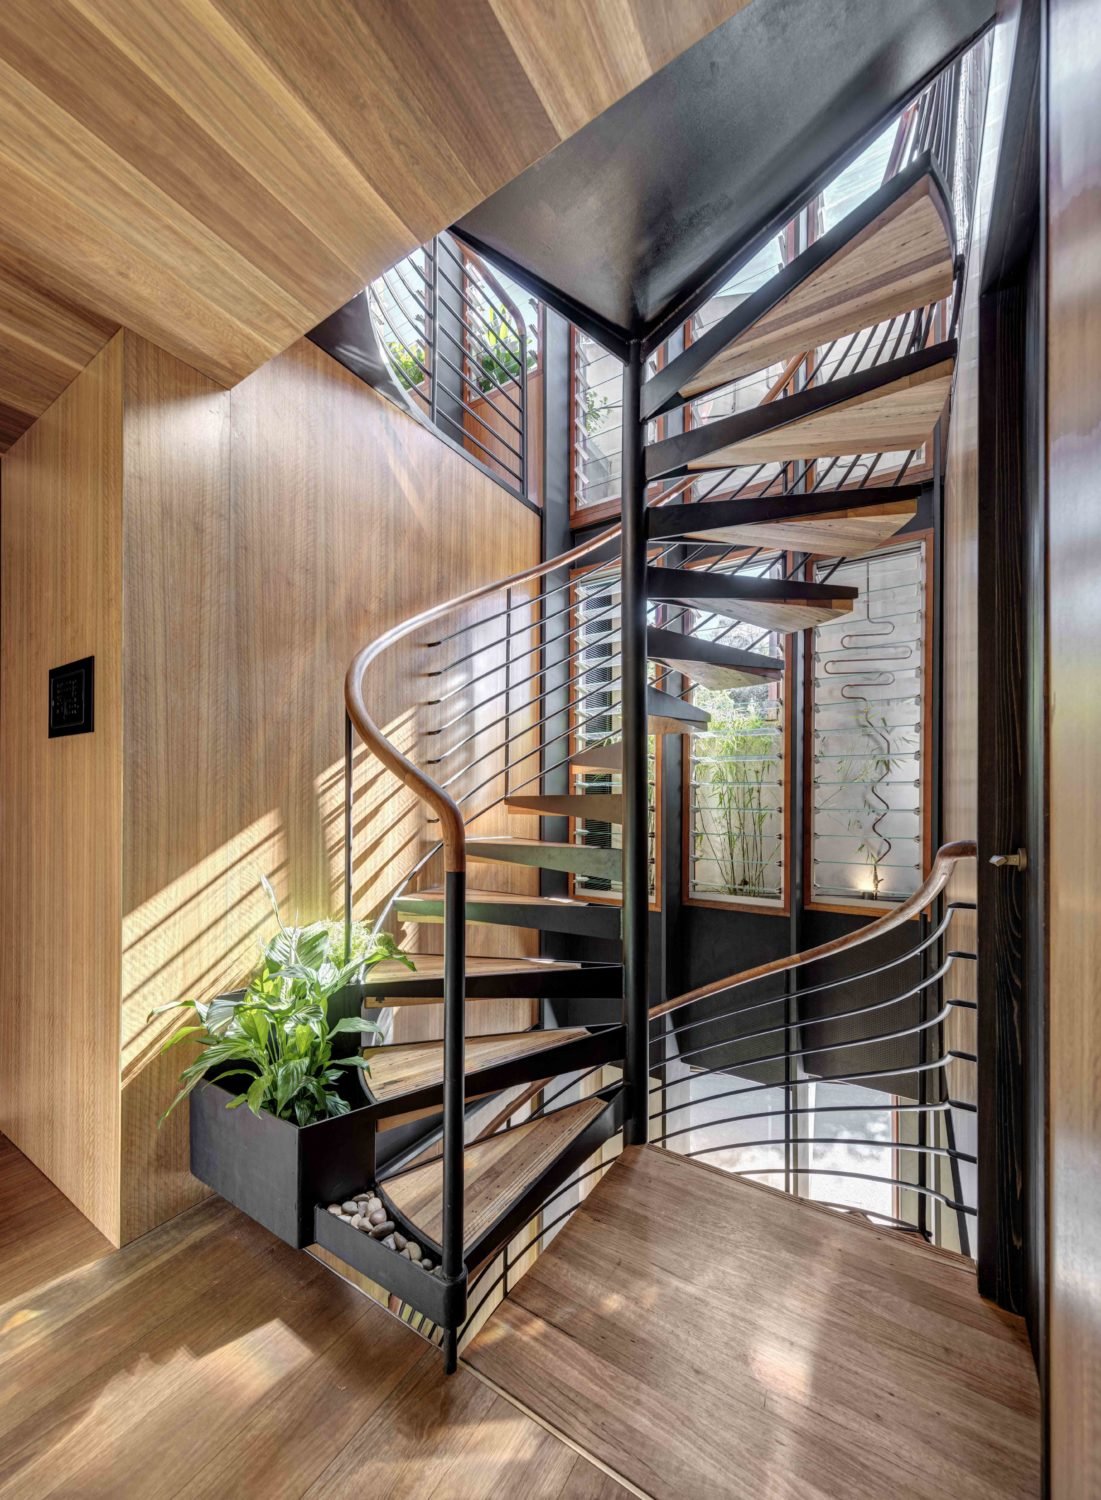 WELCOME-TO-THE-JUNGLE-HOUSE_SPIRAL-STAIRCASE-FIRST-FLOOR-2-1101x1500.jpg